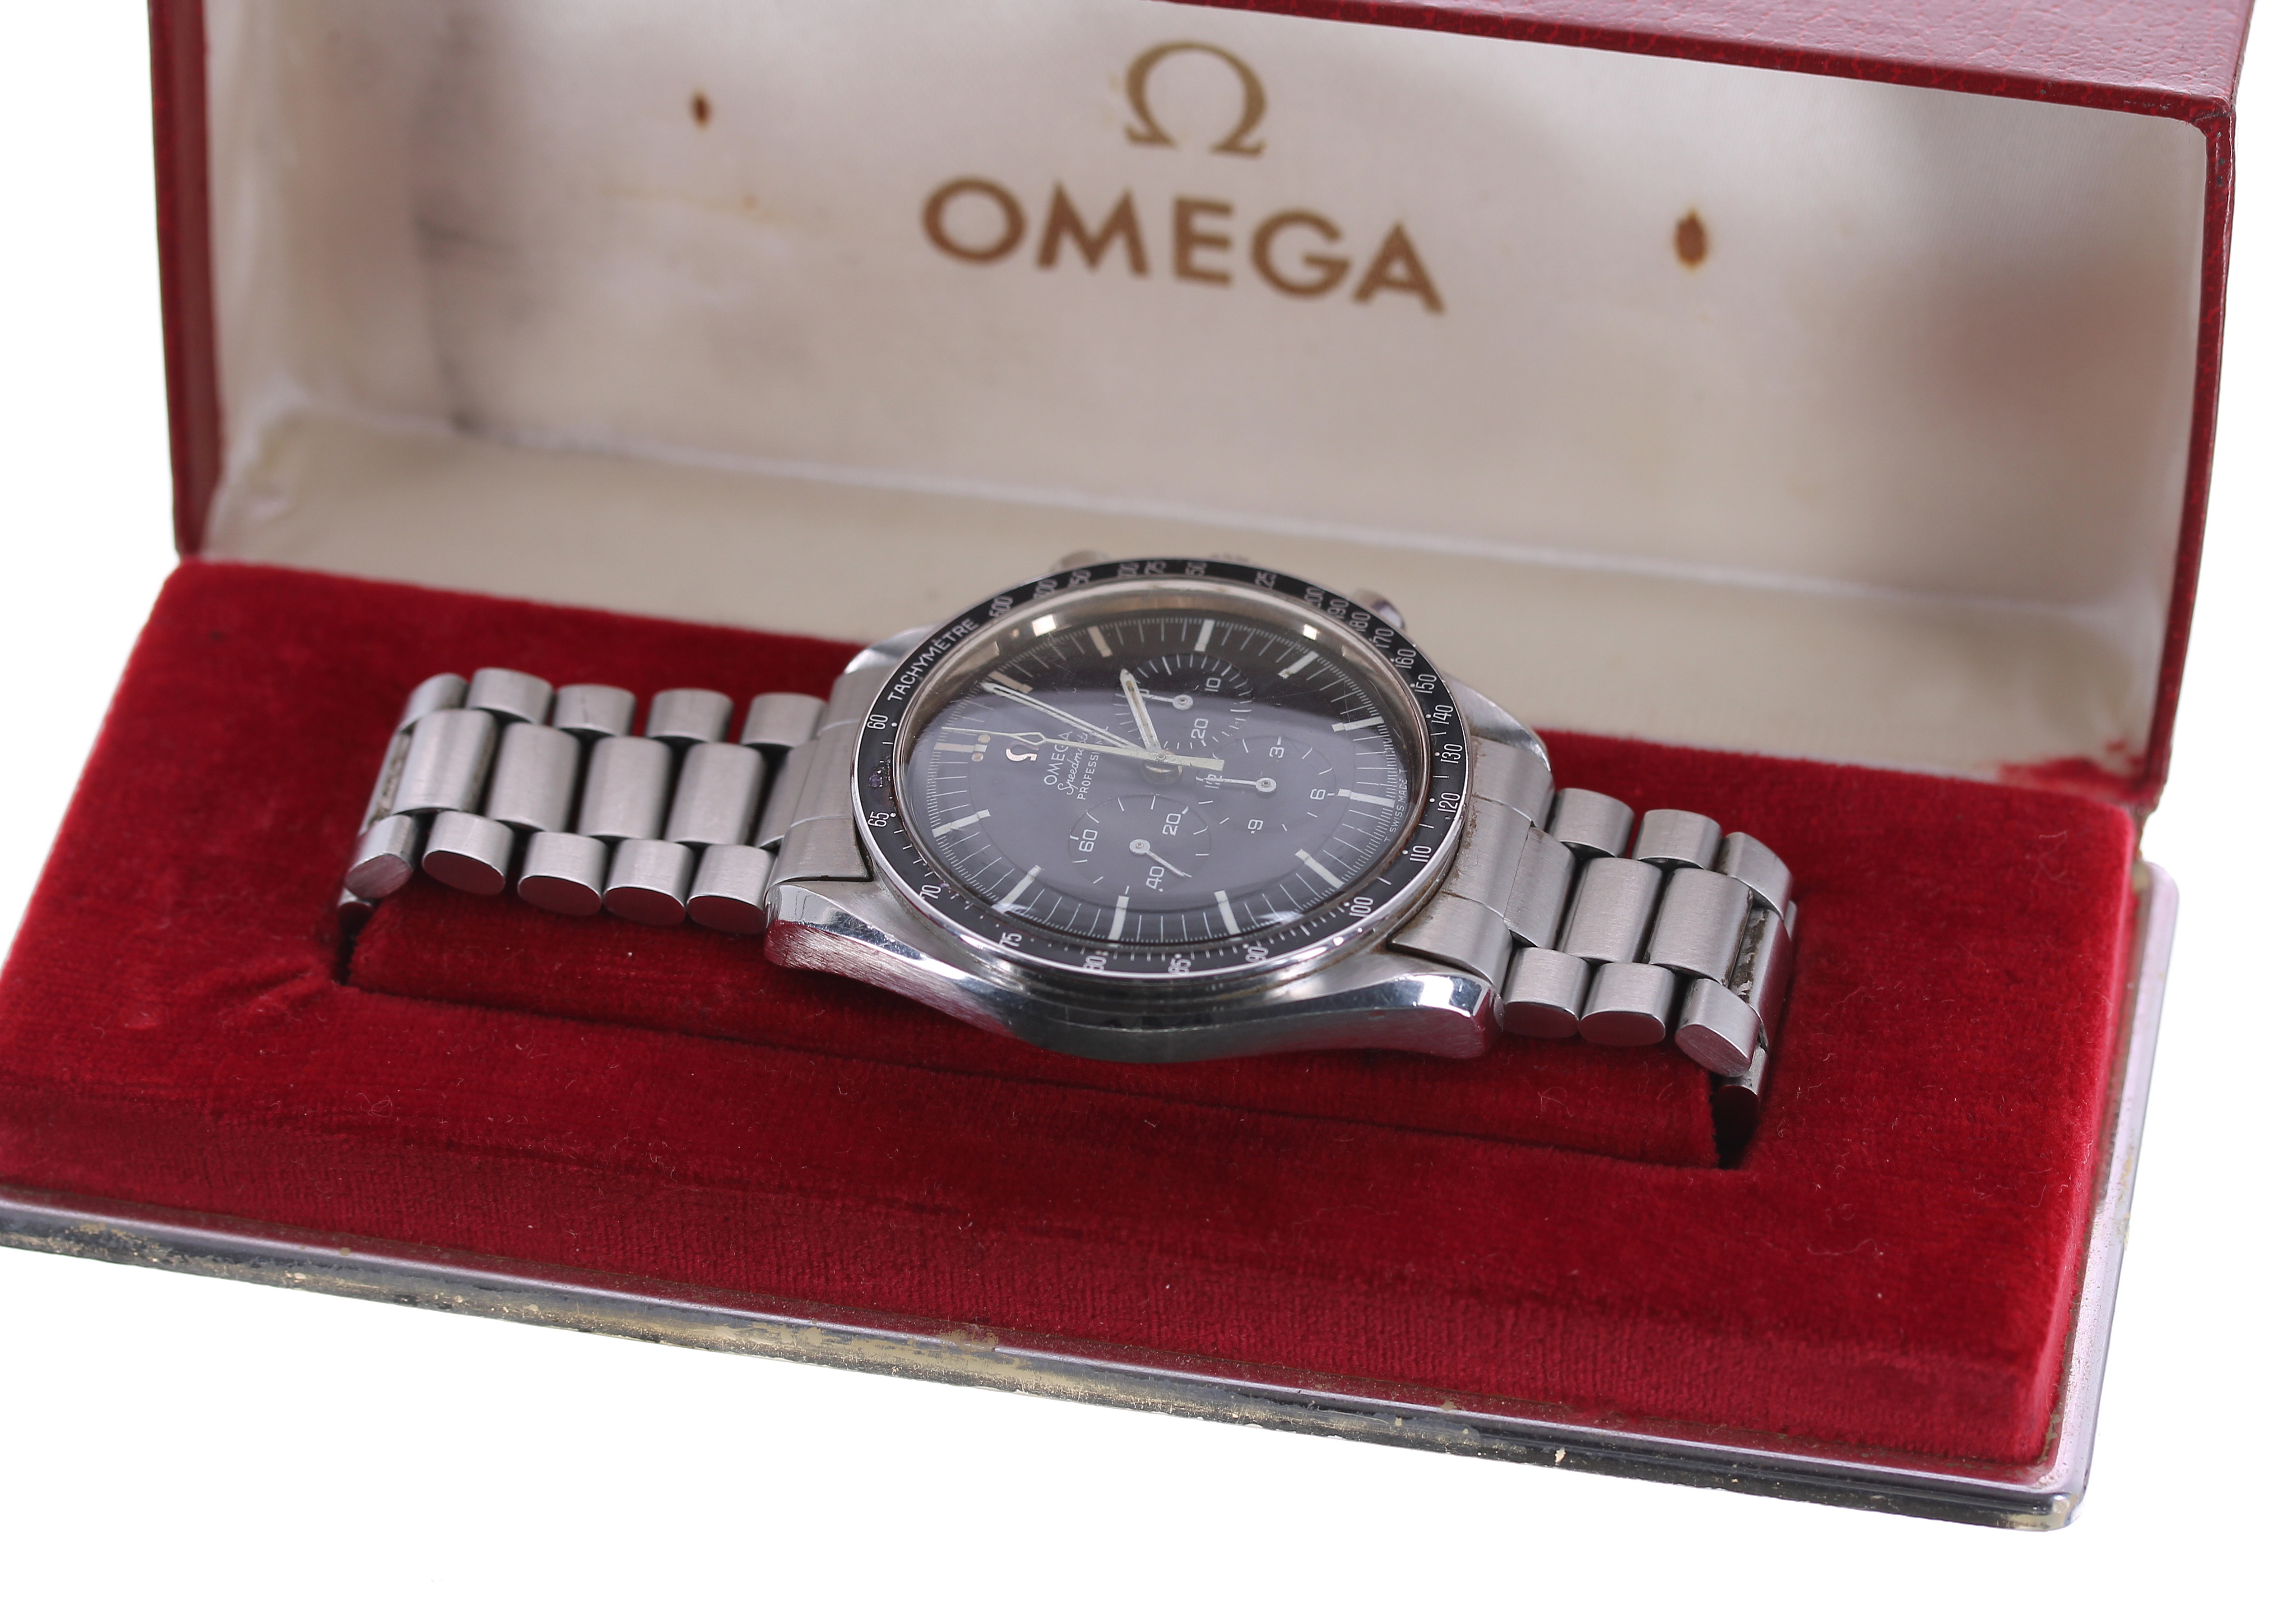 The Omega Speedmaster in its casewatch